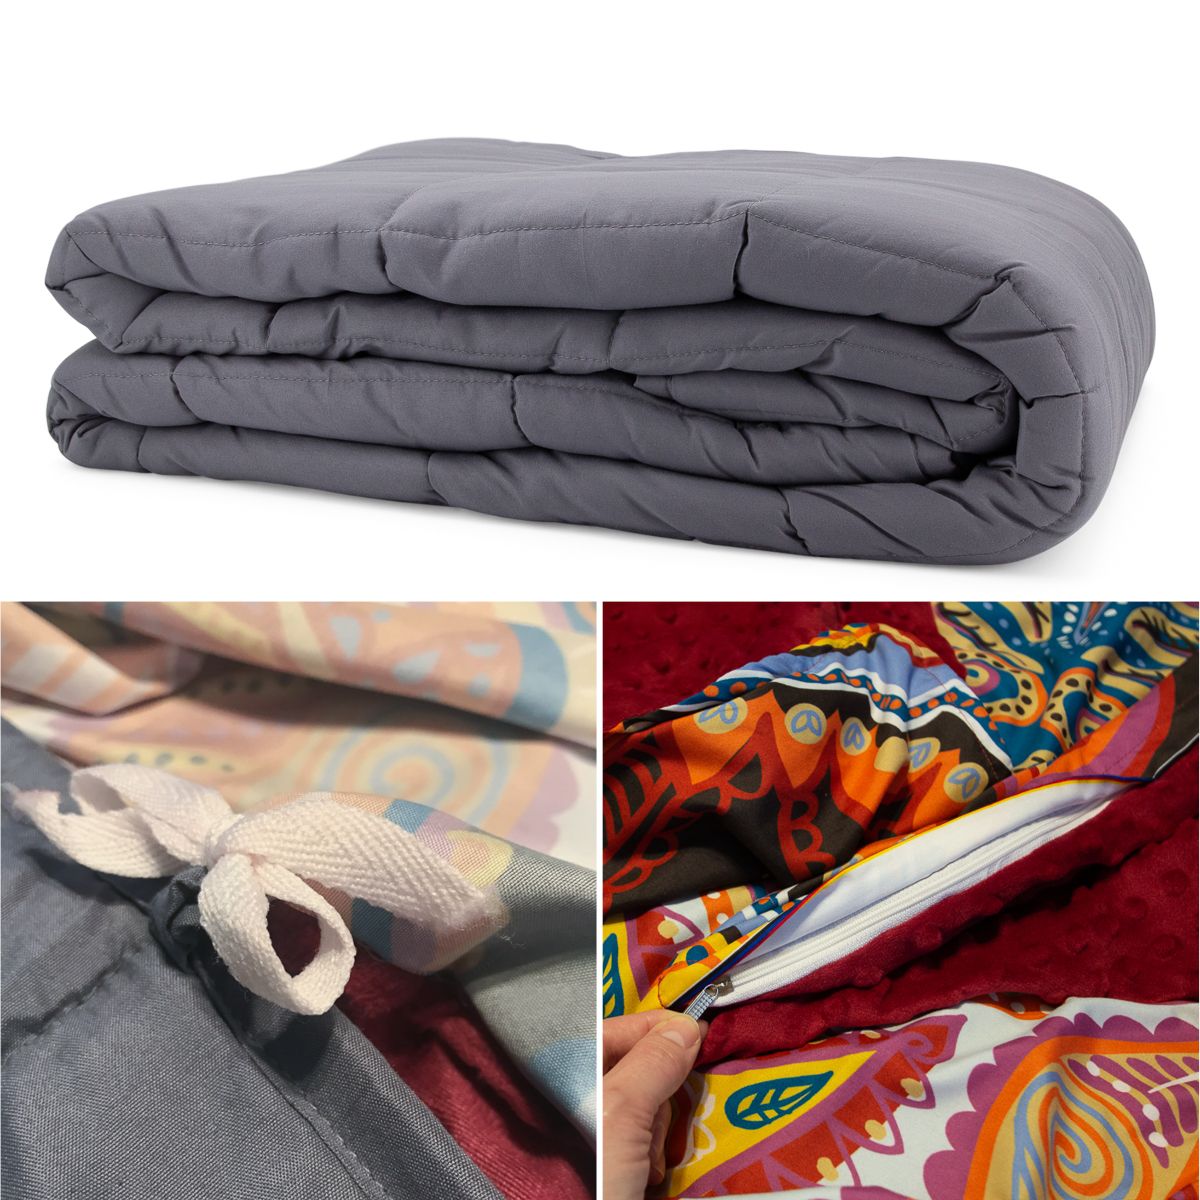 20lb Weighted Blanket, Removable Duvet Cover, Case - Queen Size - Scarvesnthangs